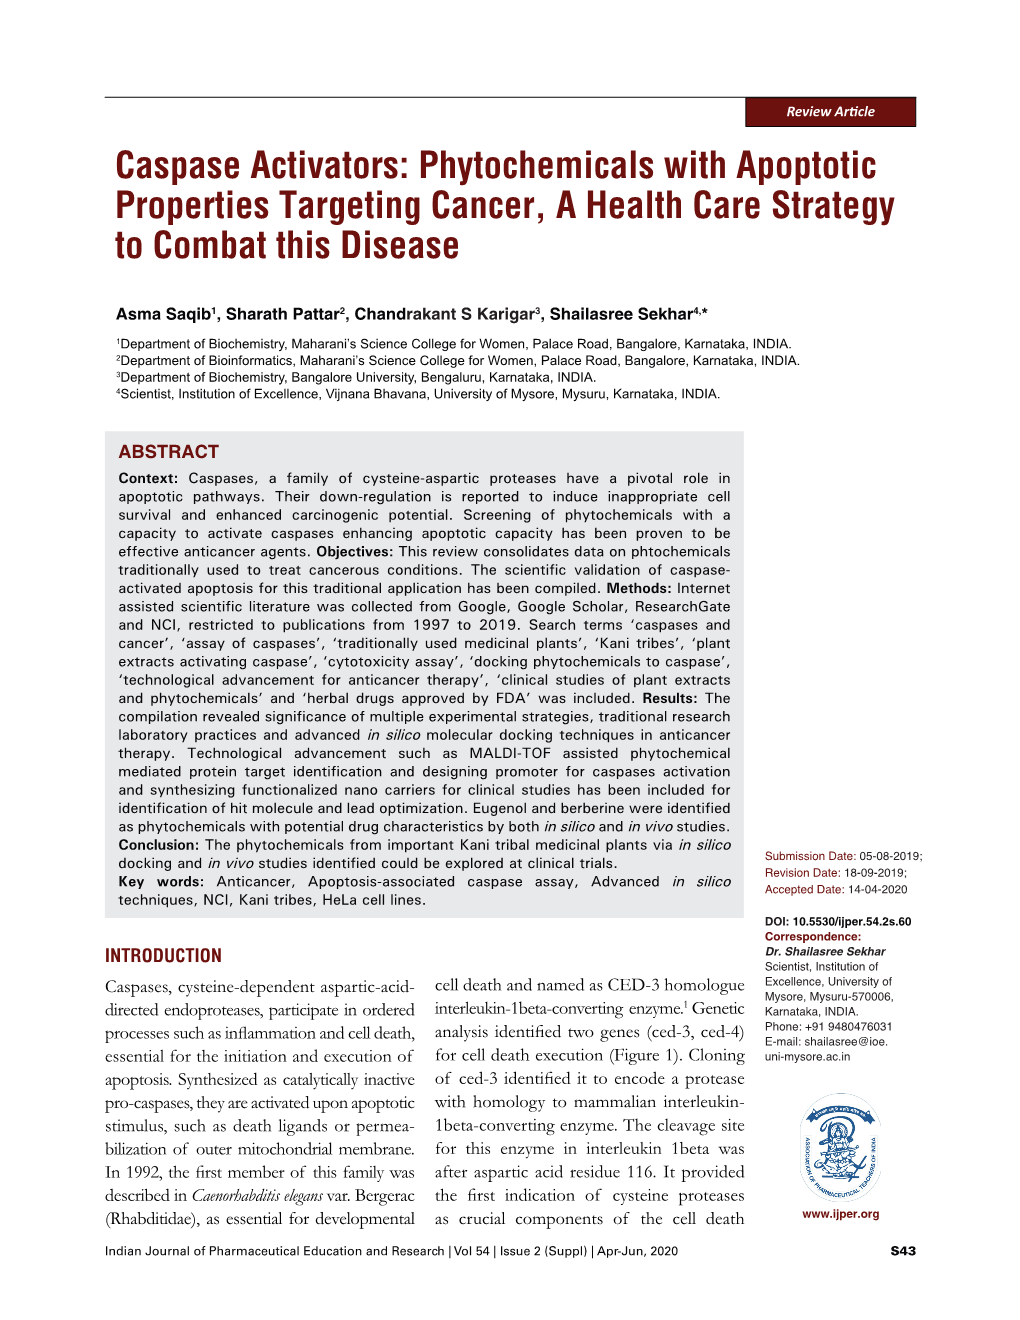 Caspase Activators: Phytochemicals with Apoptotic Properties Targeting Cancer, a Health Care Strategy to Combat This Disease